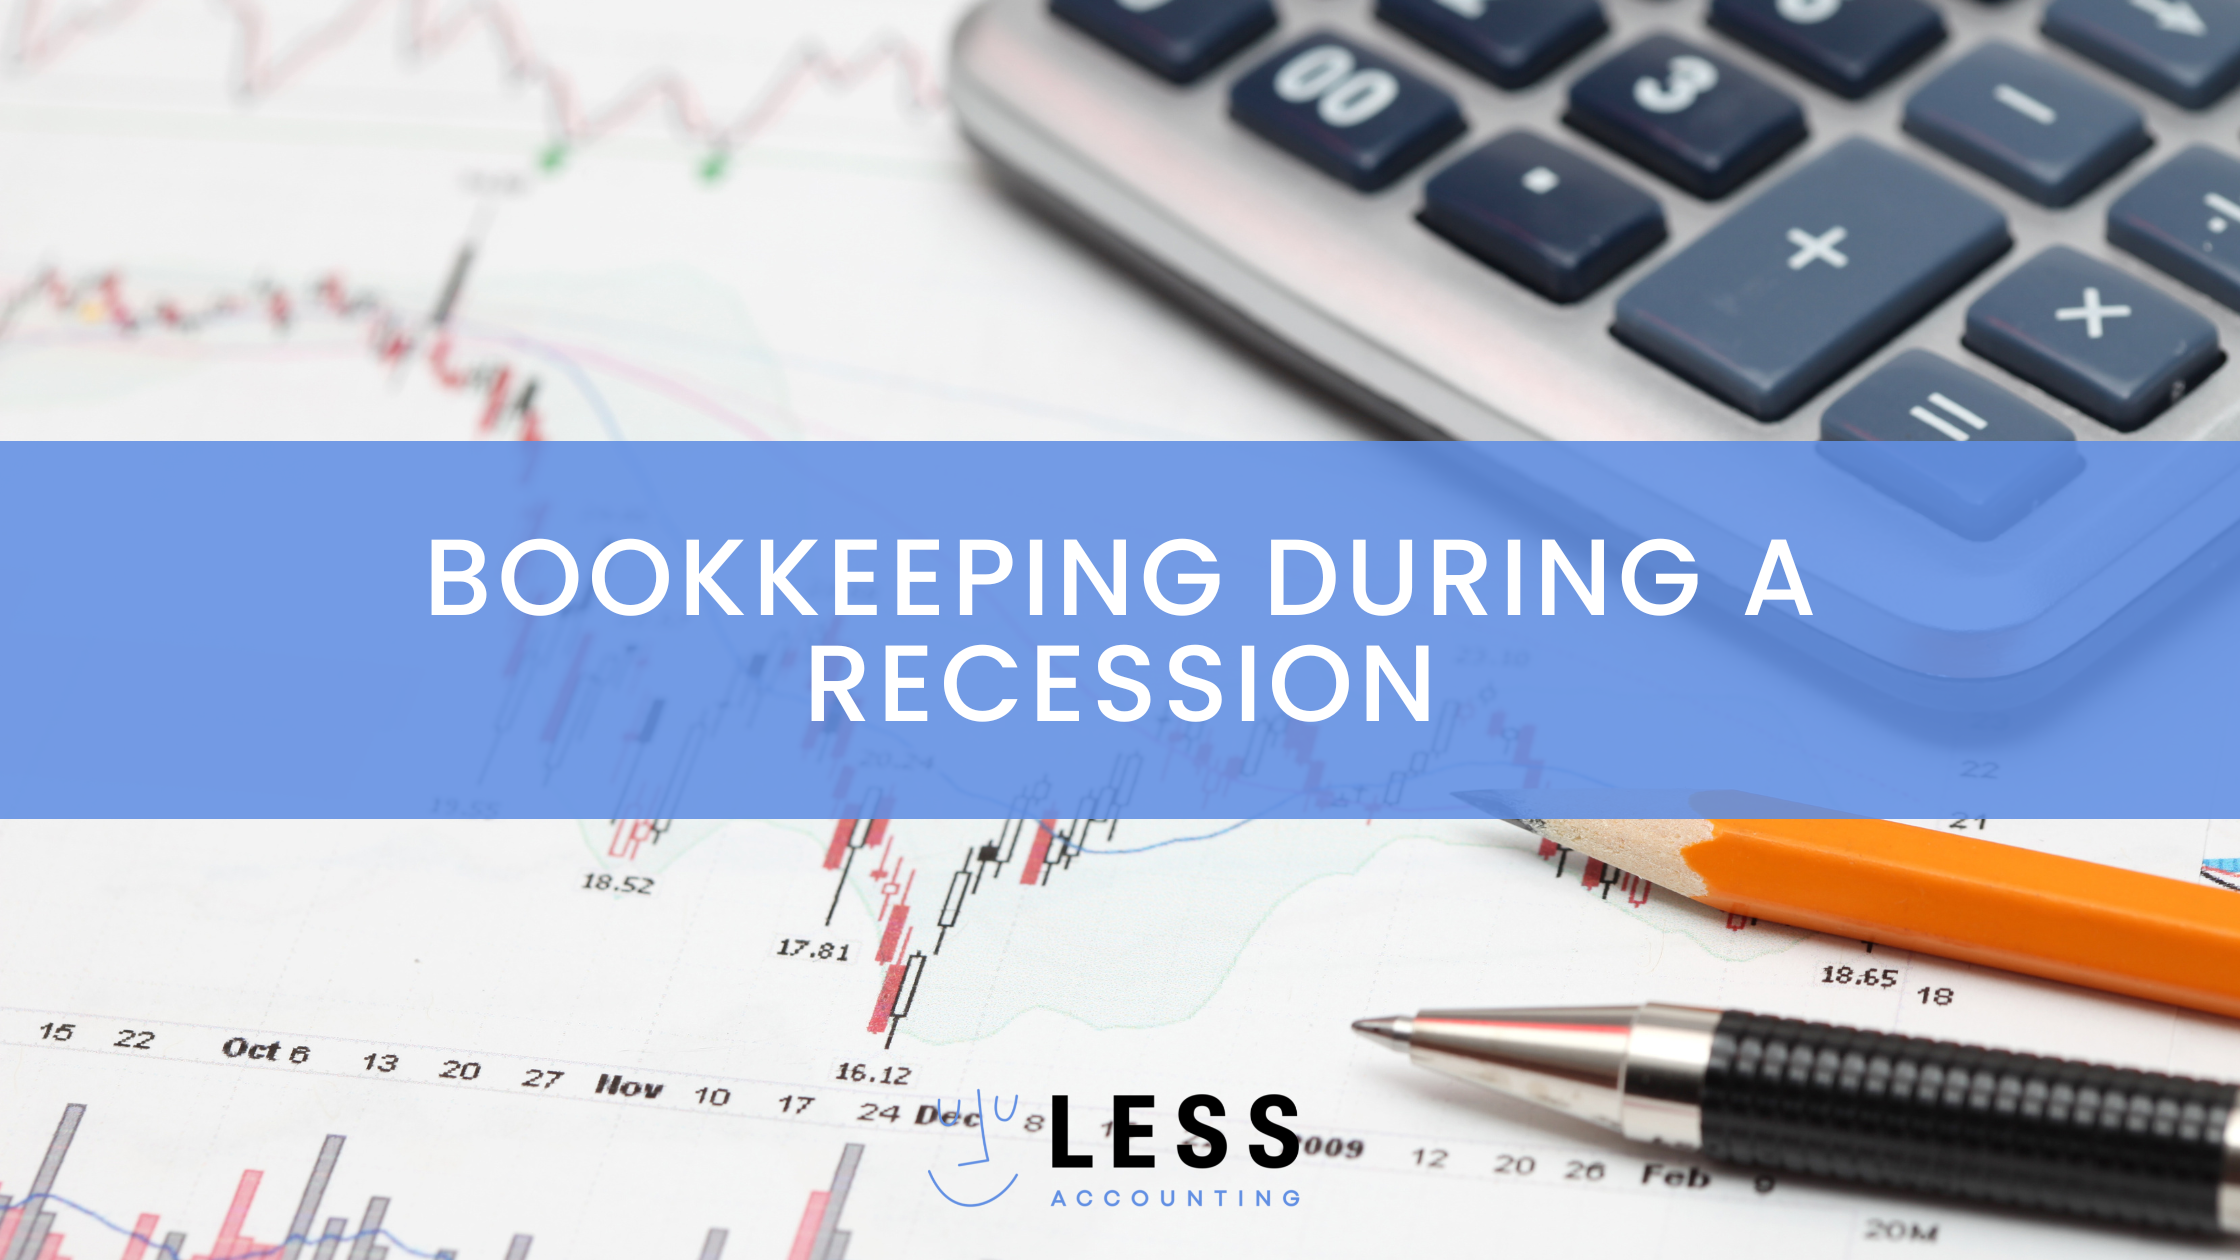 How Bookkeeping Can Help You Prepare For a Recession